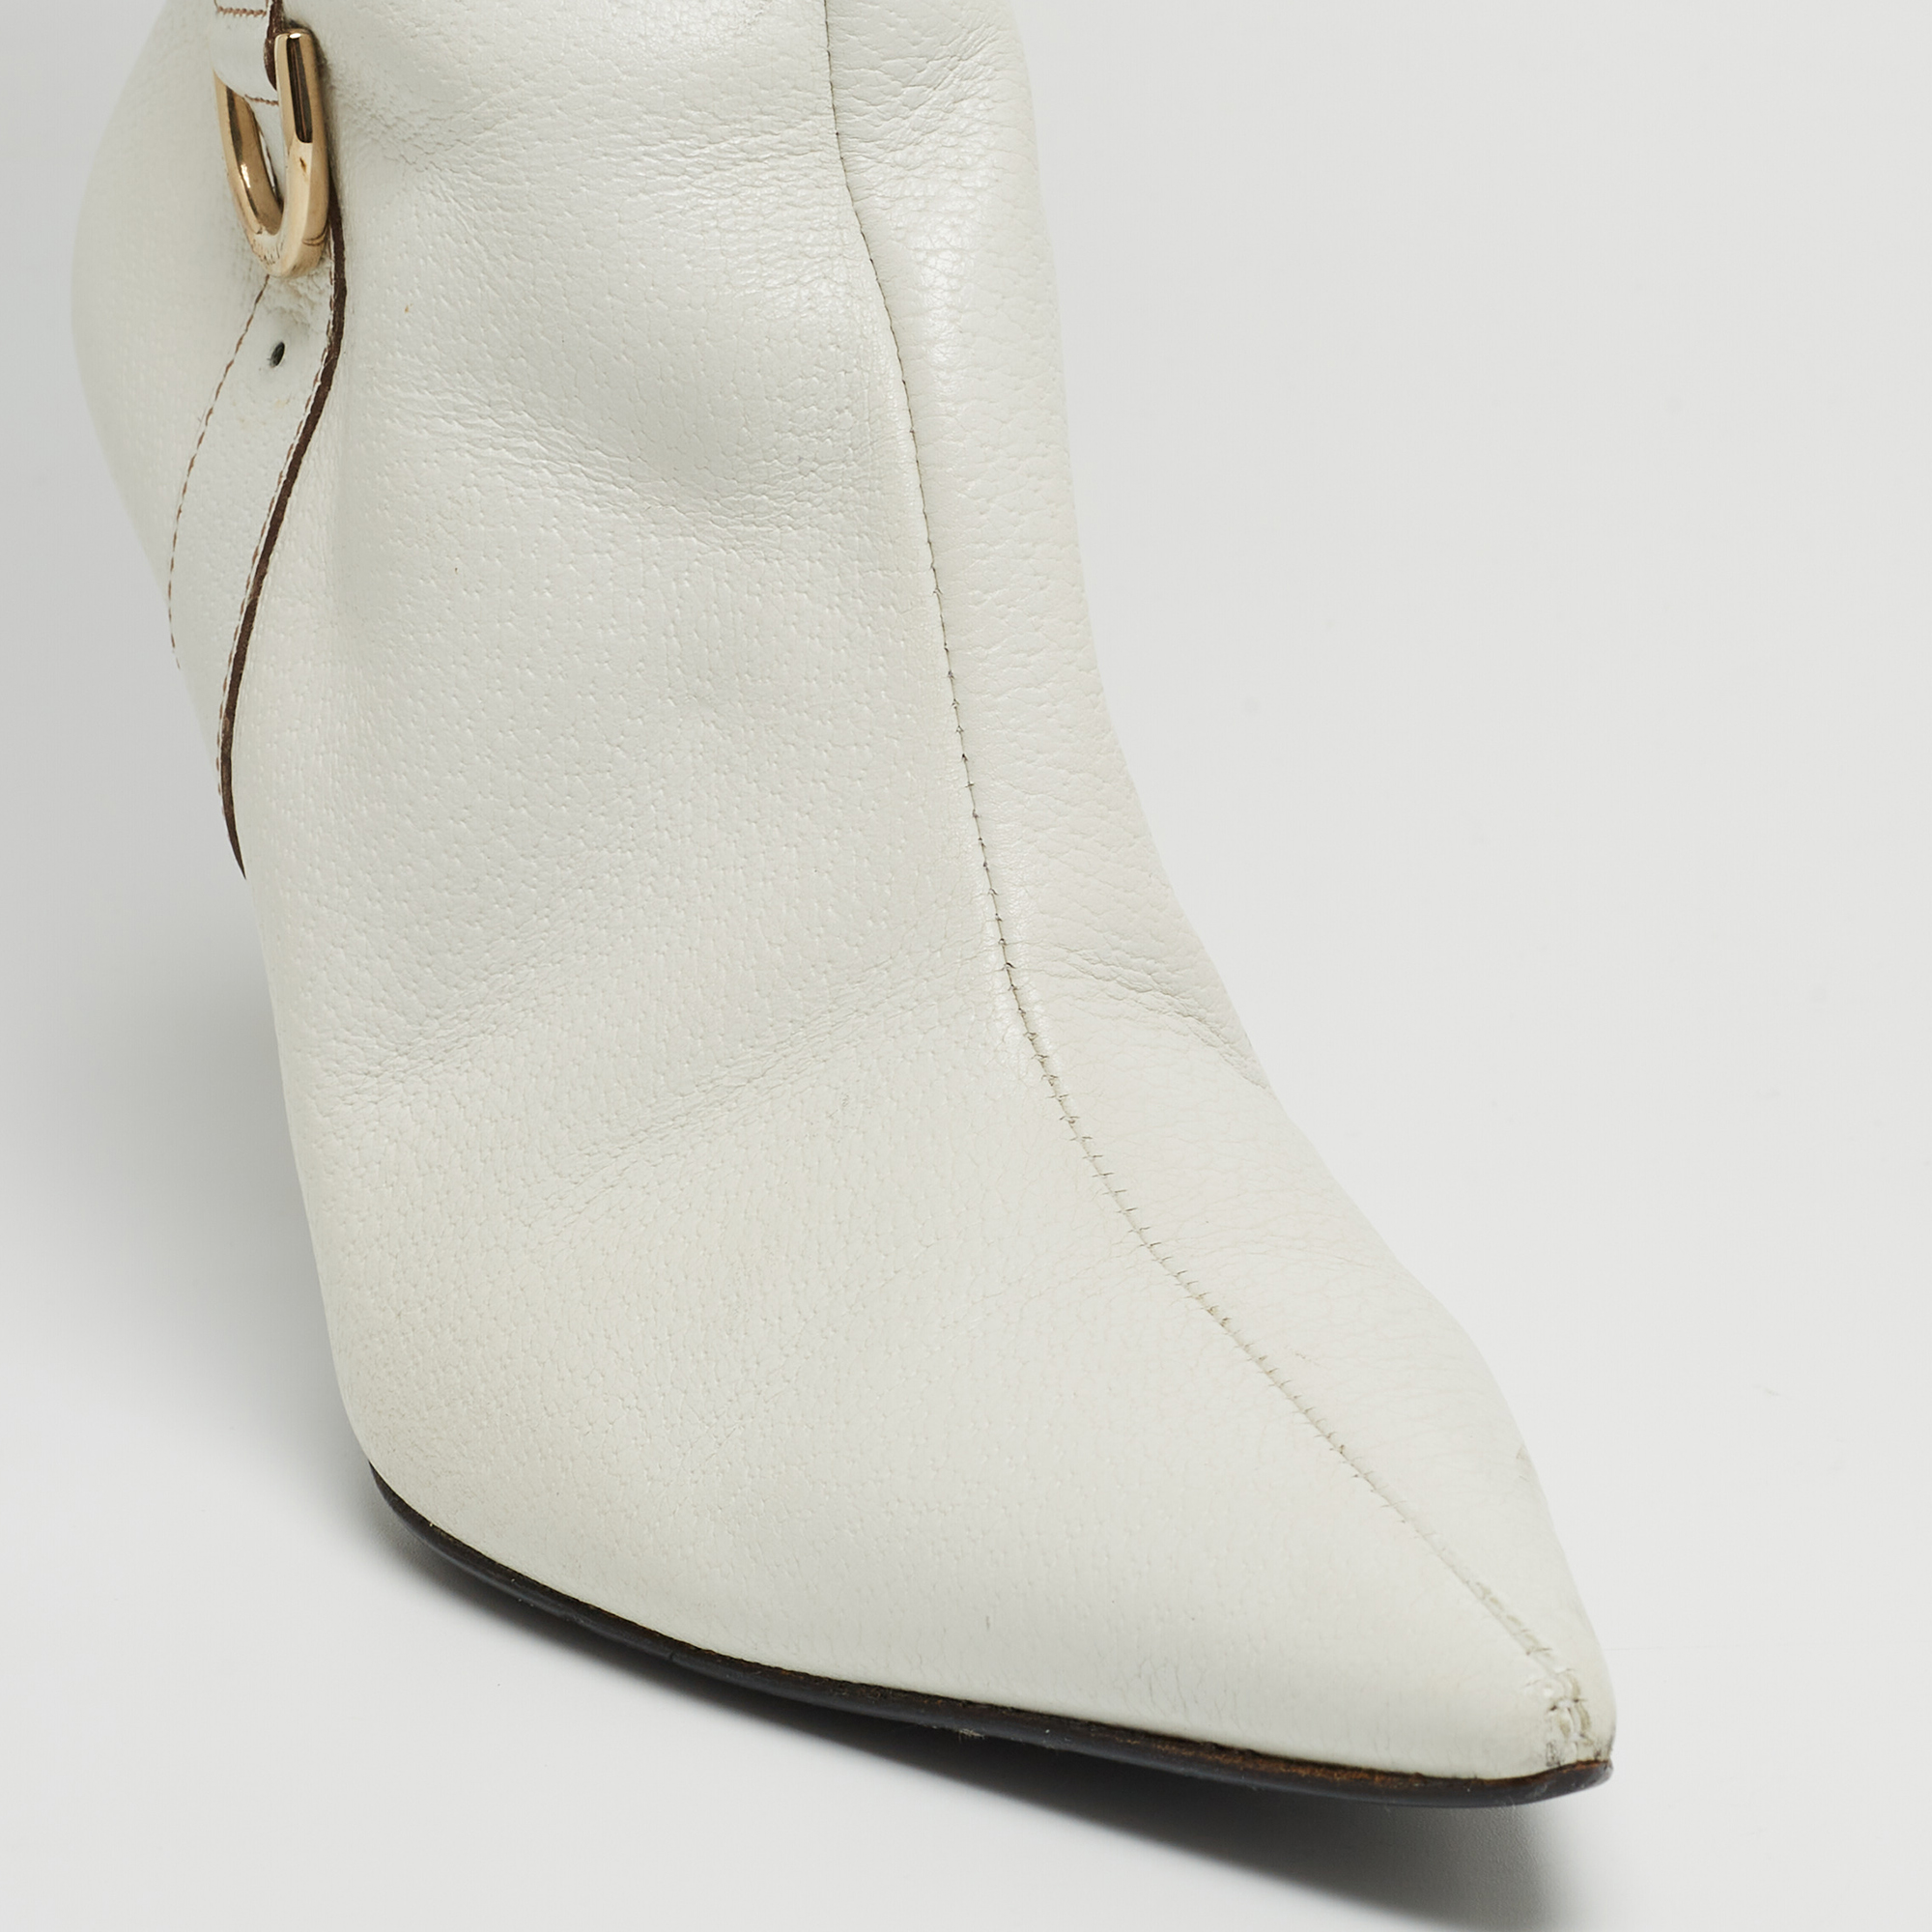 Gucci White Leather Pointed Toe Knee Length Boots Size 41